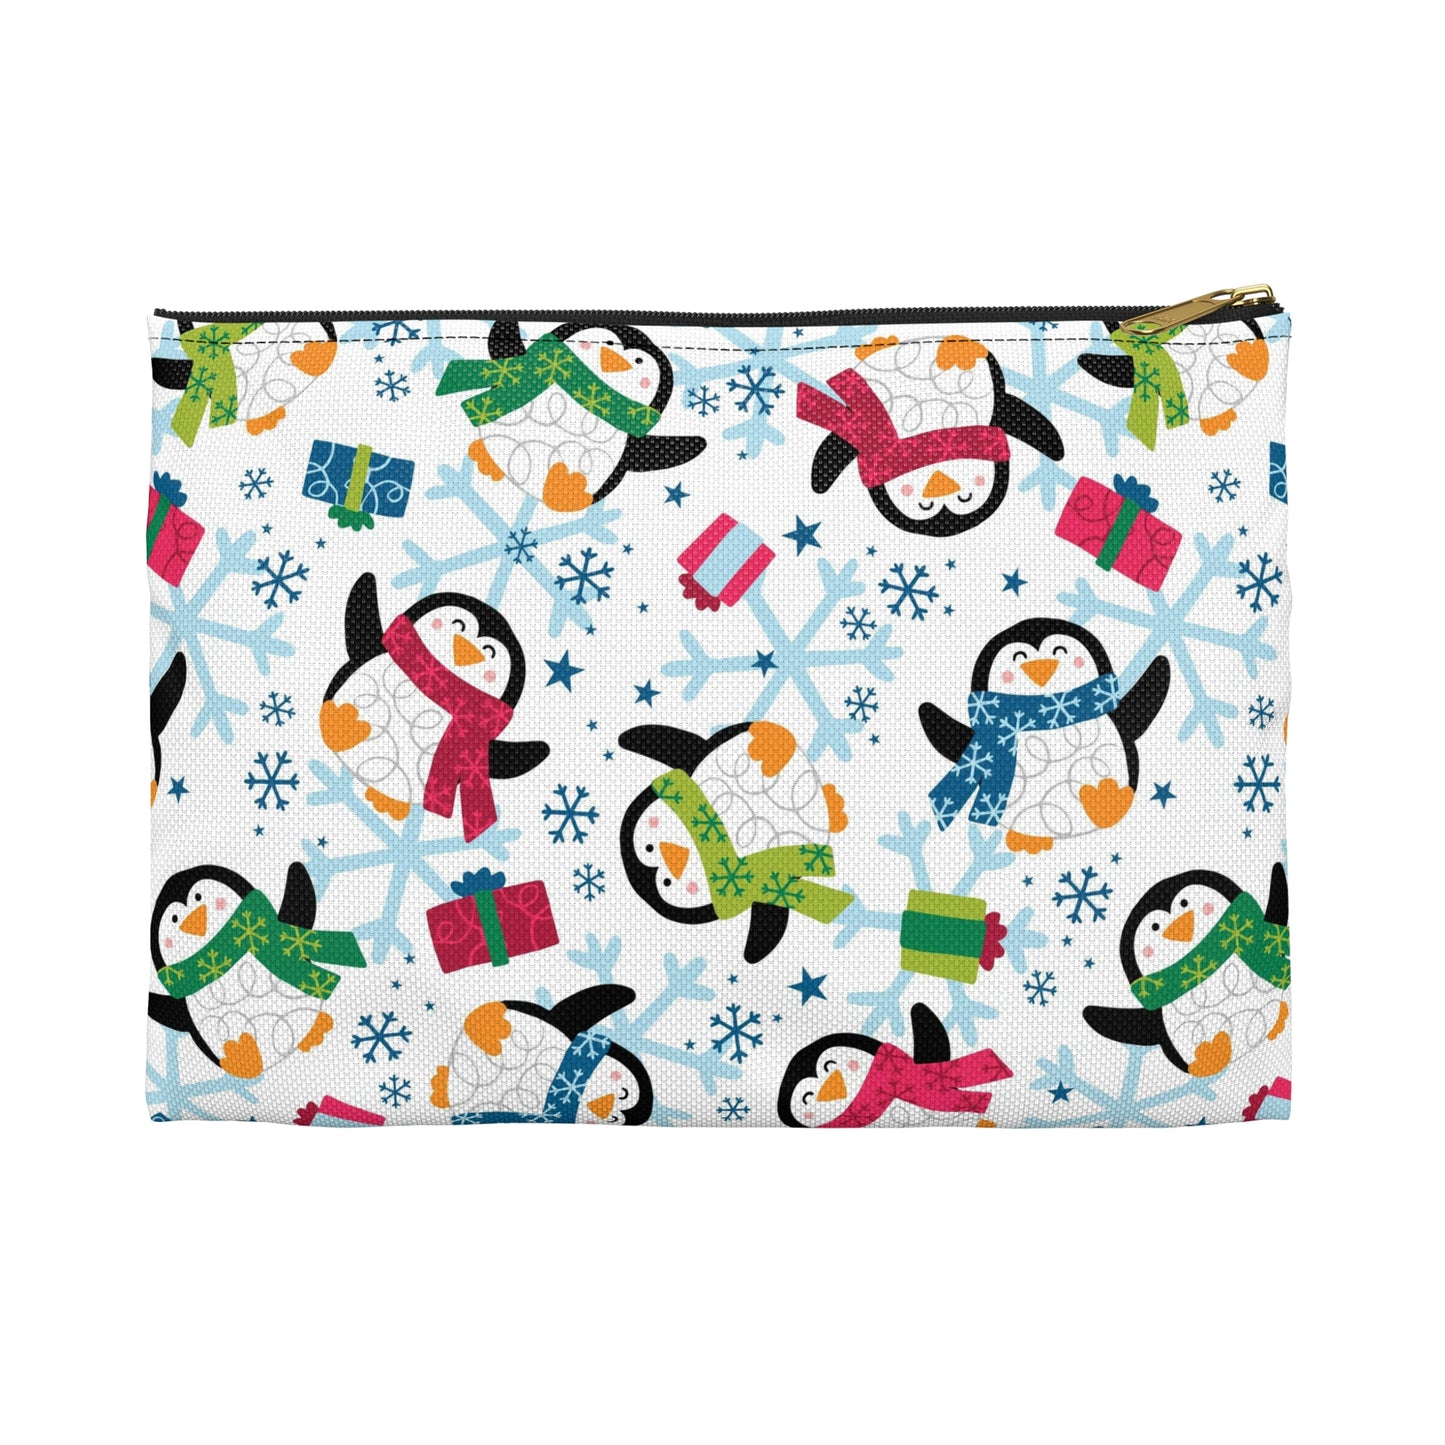 Penguins and Snowflakes Accessory Pouch